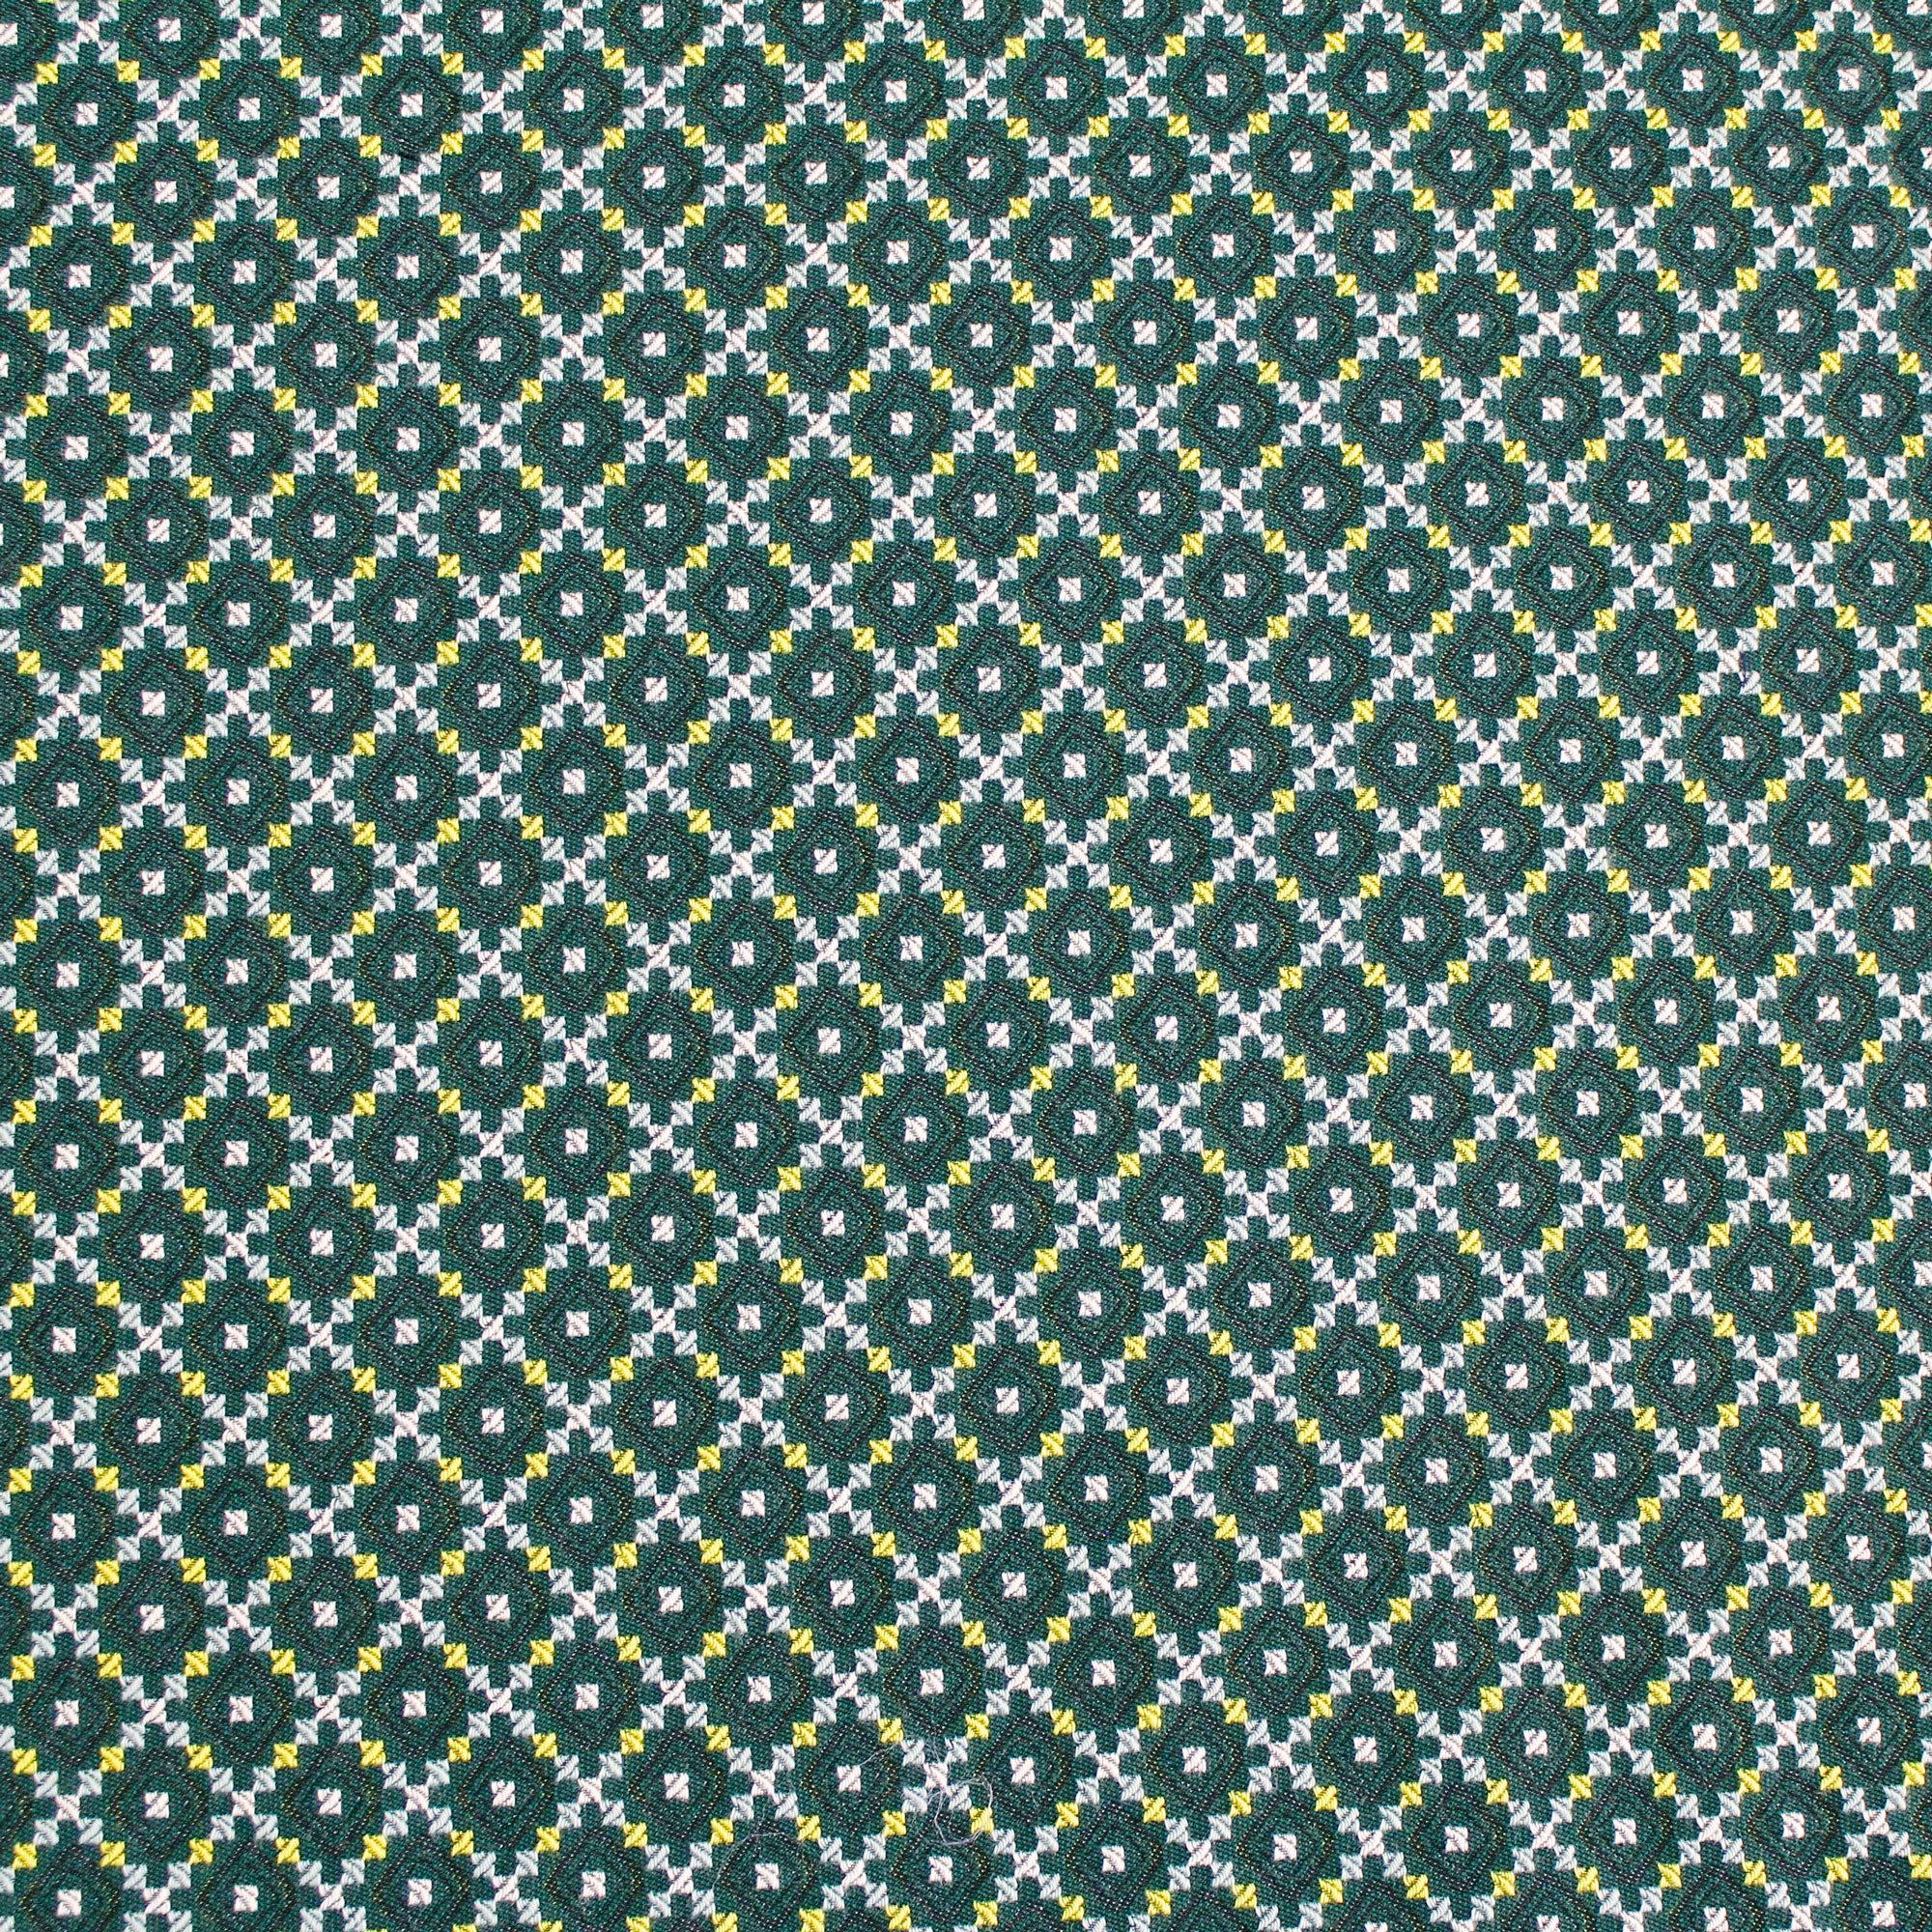 Reversible cotton jacquard fabric with green and yellow graphic patterns